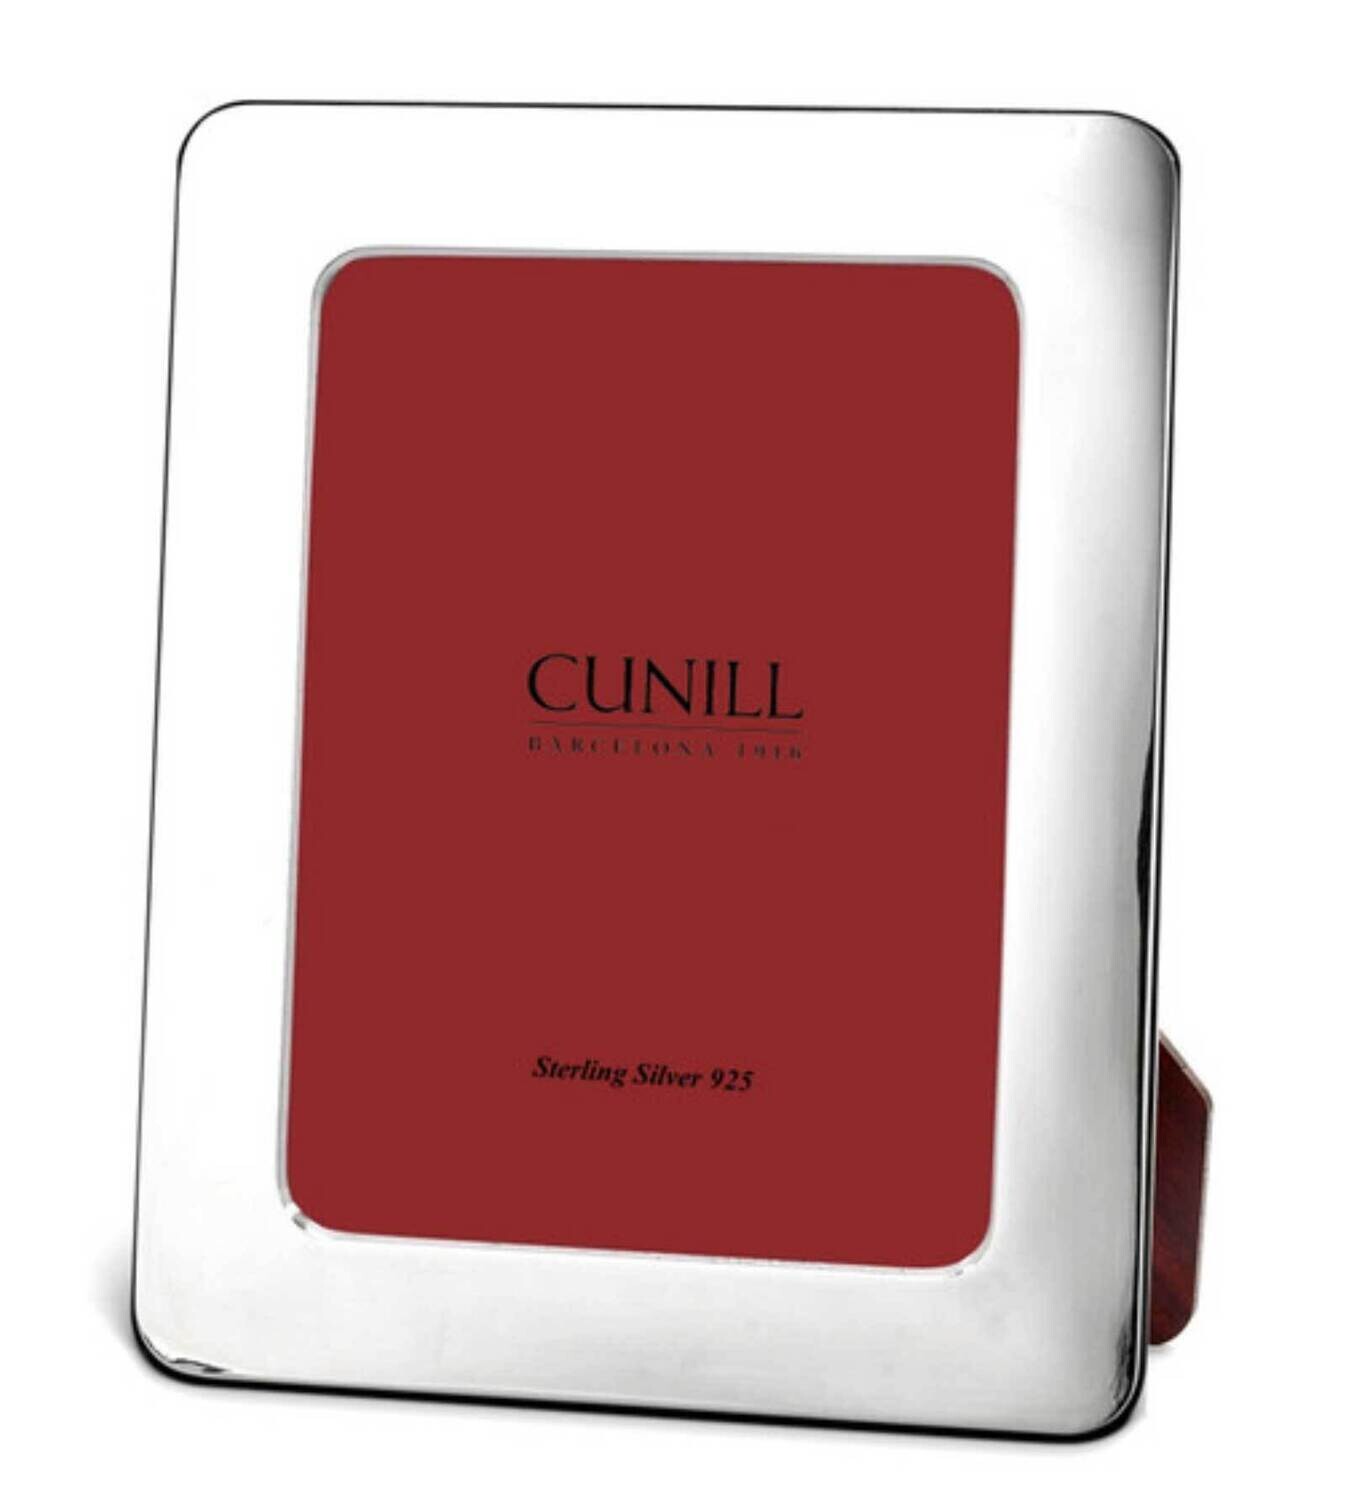 Cunill Plain 8x10 Inch Picture Frame .925 Sterling Silver 10179